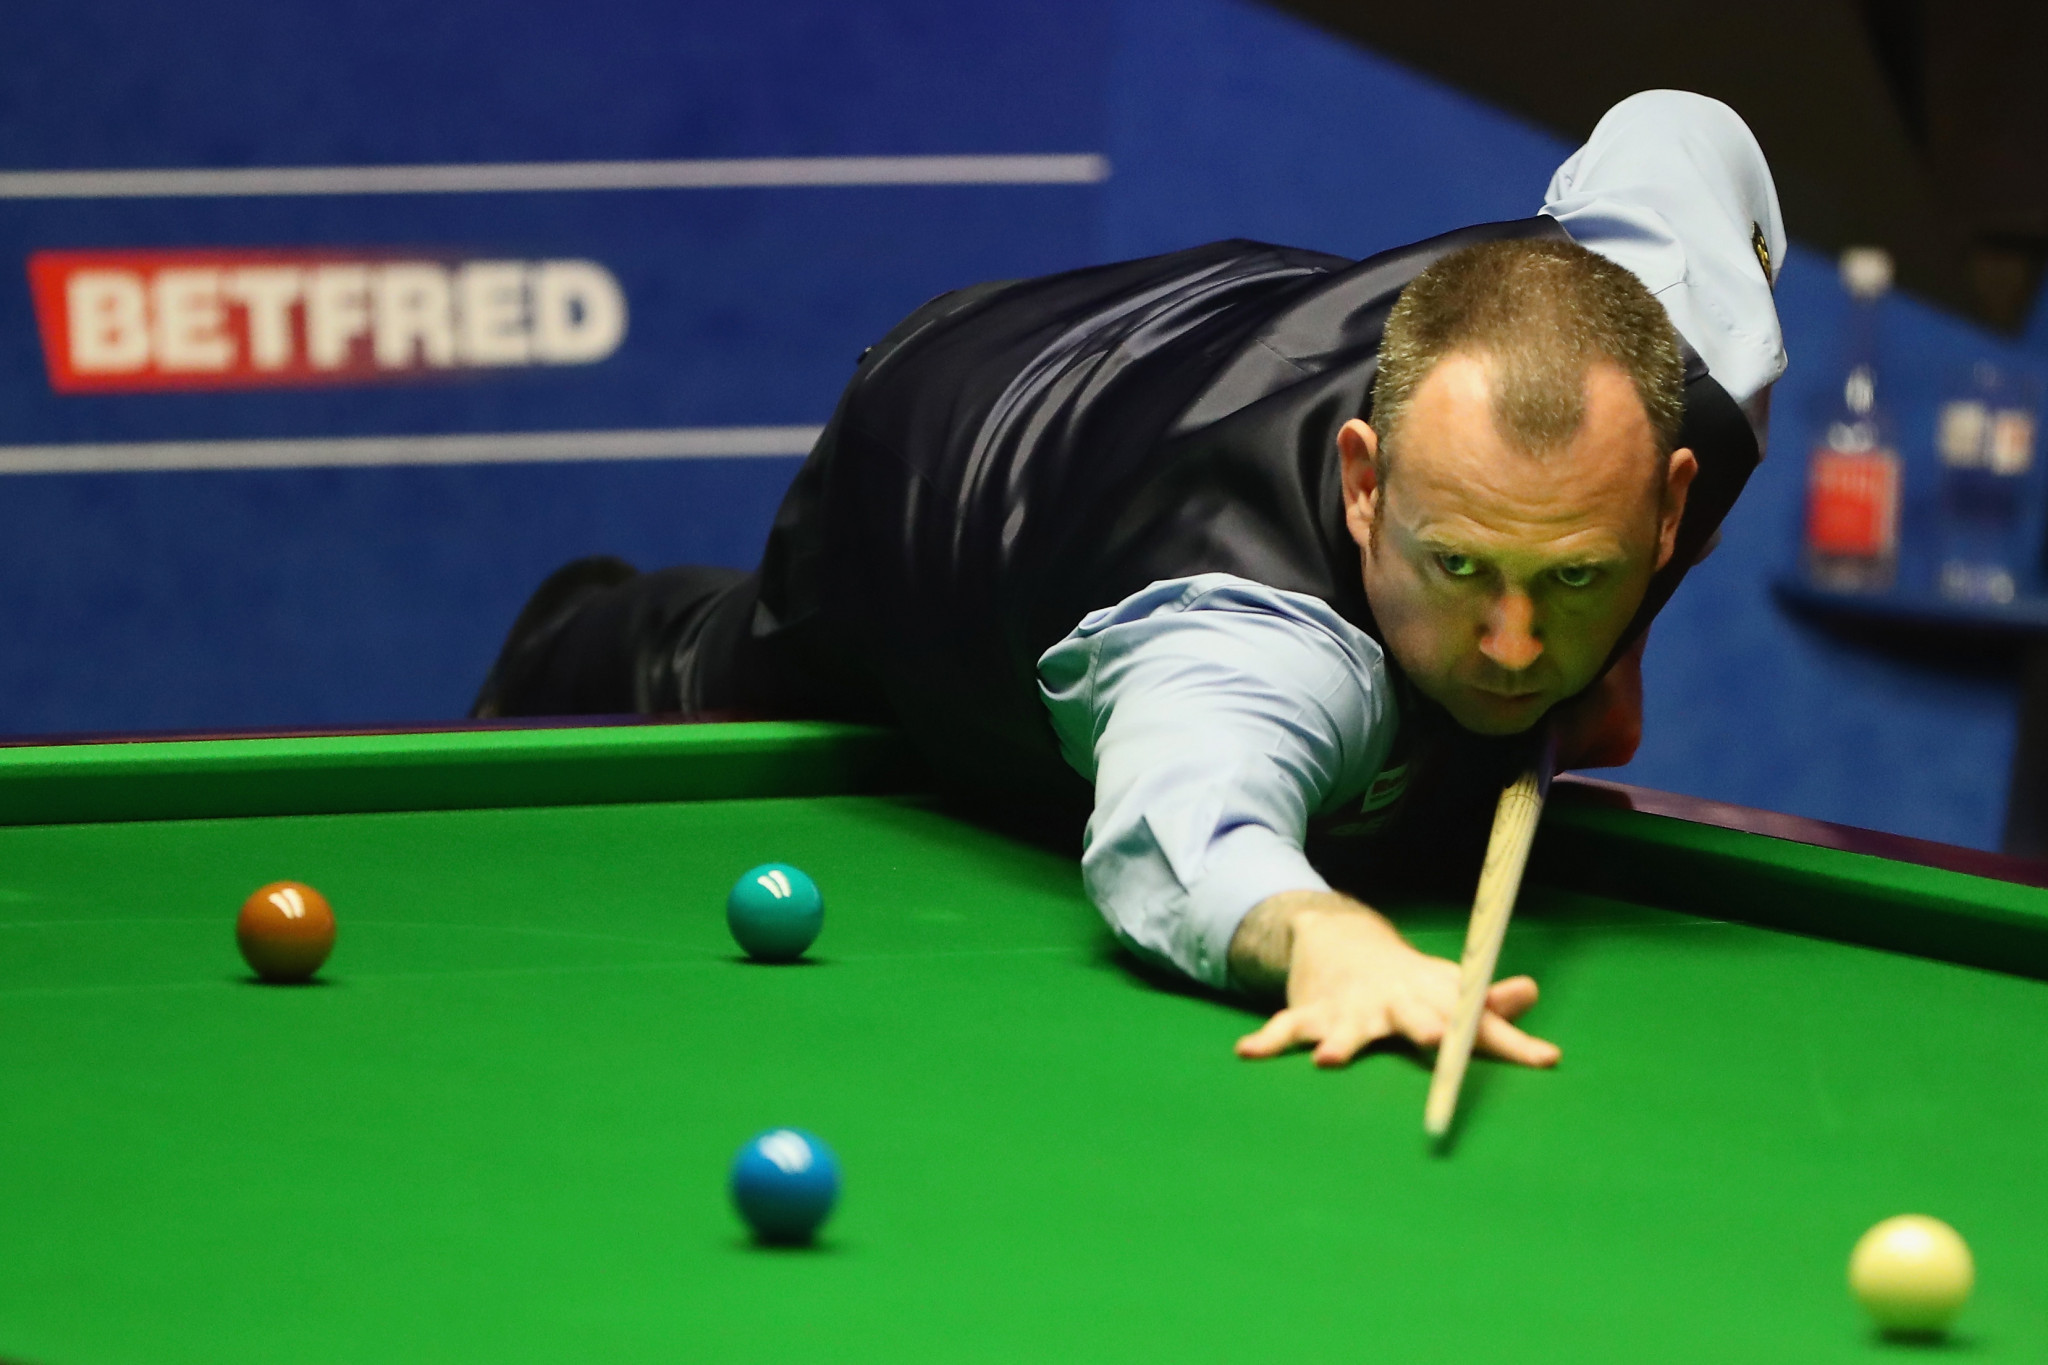 Williams earns three frame lead after first day of World Snooker Championship final